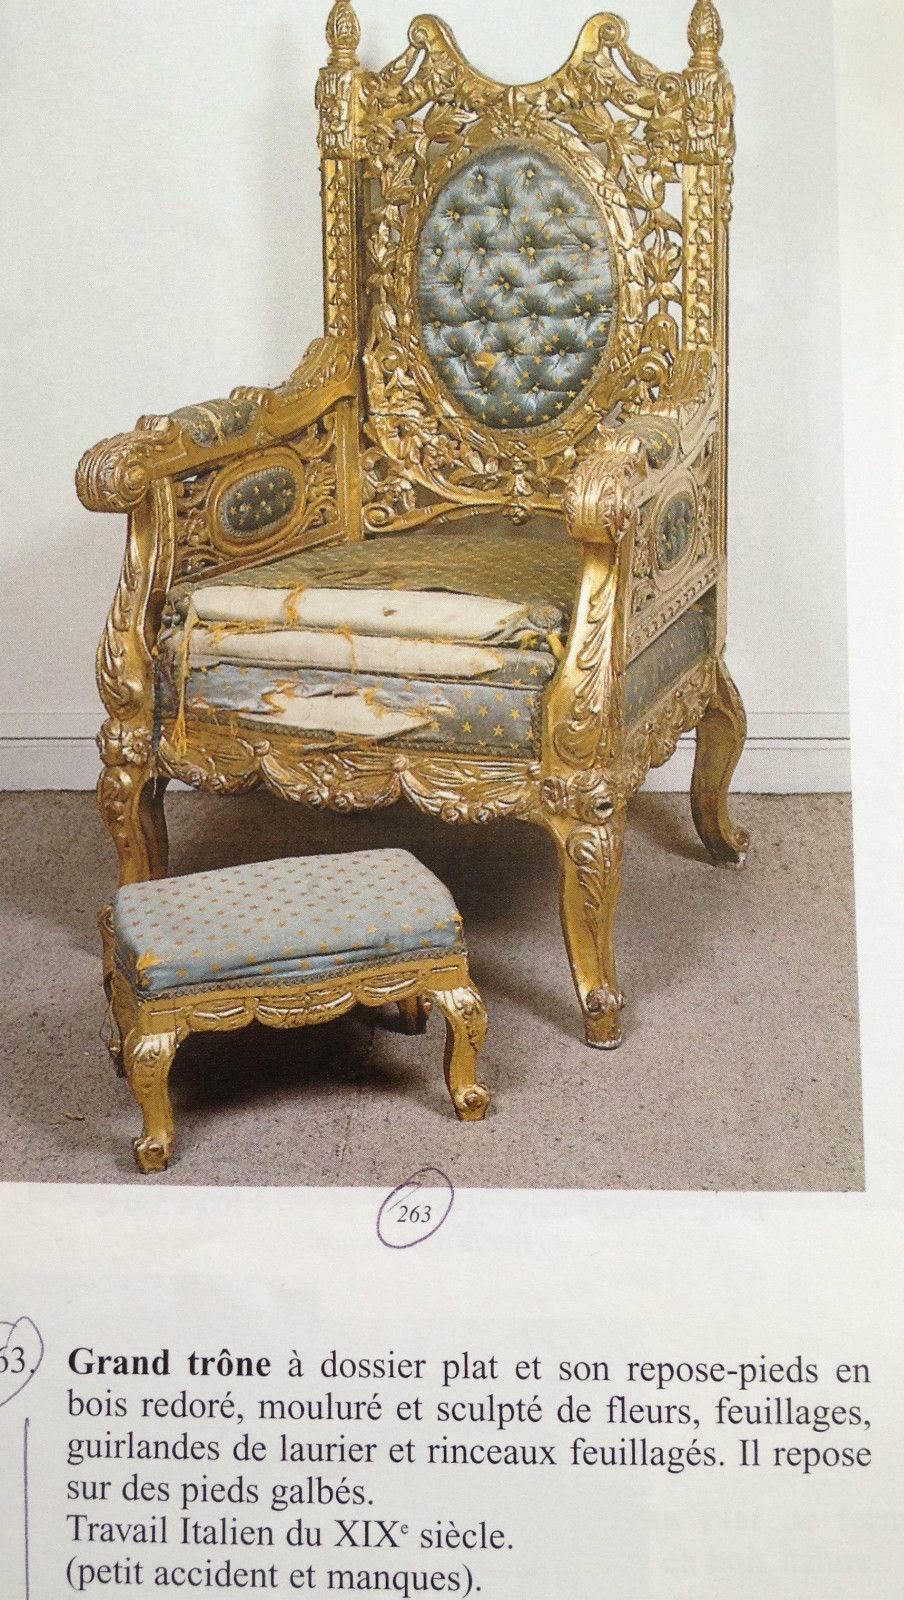 Exceptional Throne Italian 1850 original need to be restored after a long period in storage. Important Provenance from Palace de So.... In France near Paris. Expertise in picture. It’s not reproduction.
The frame of the Throne are in good